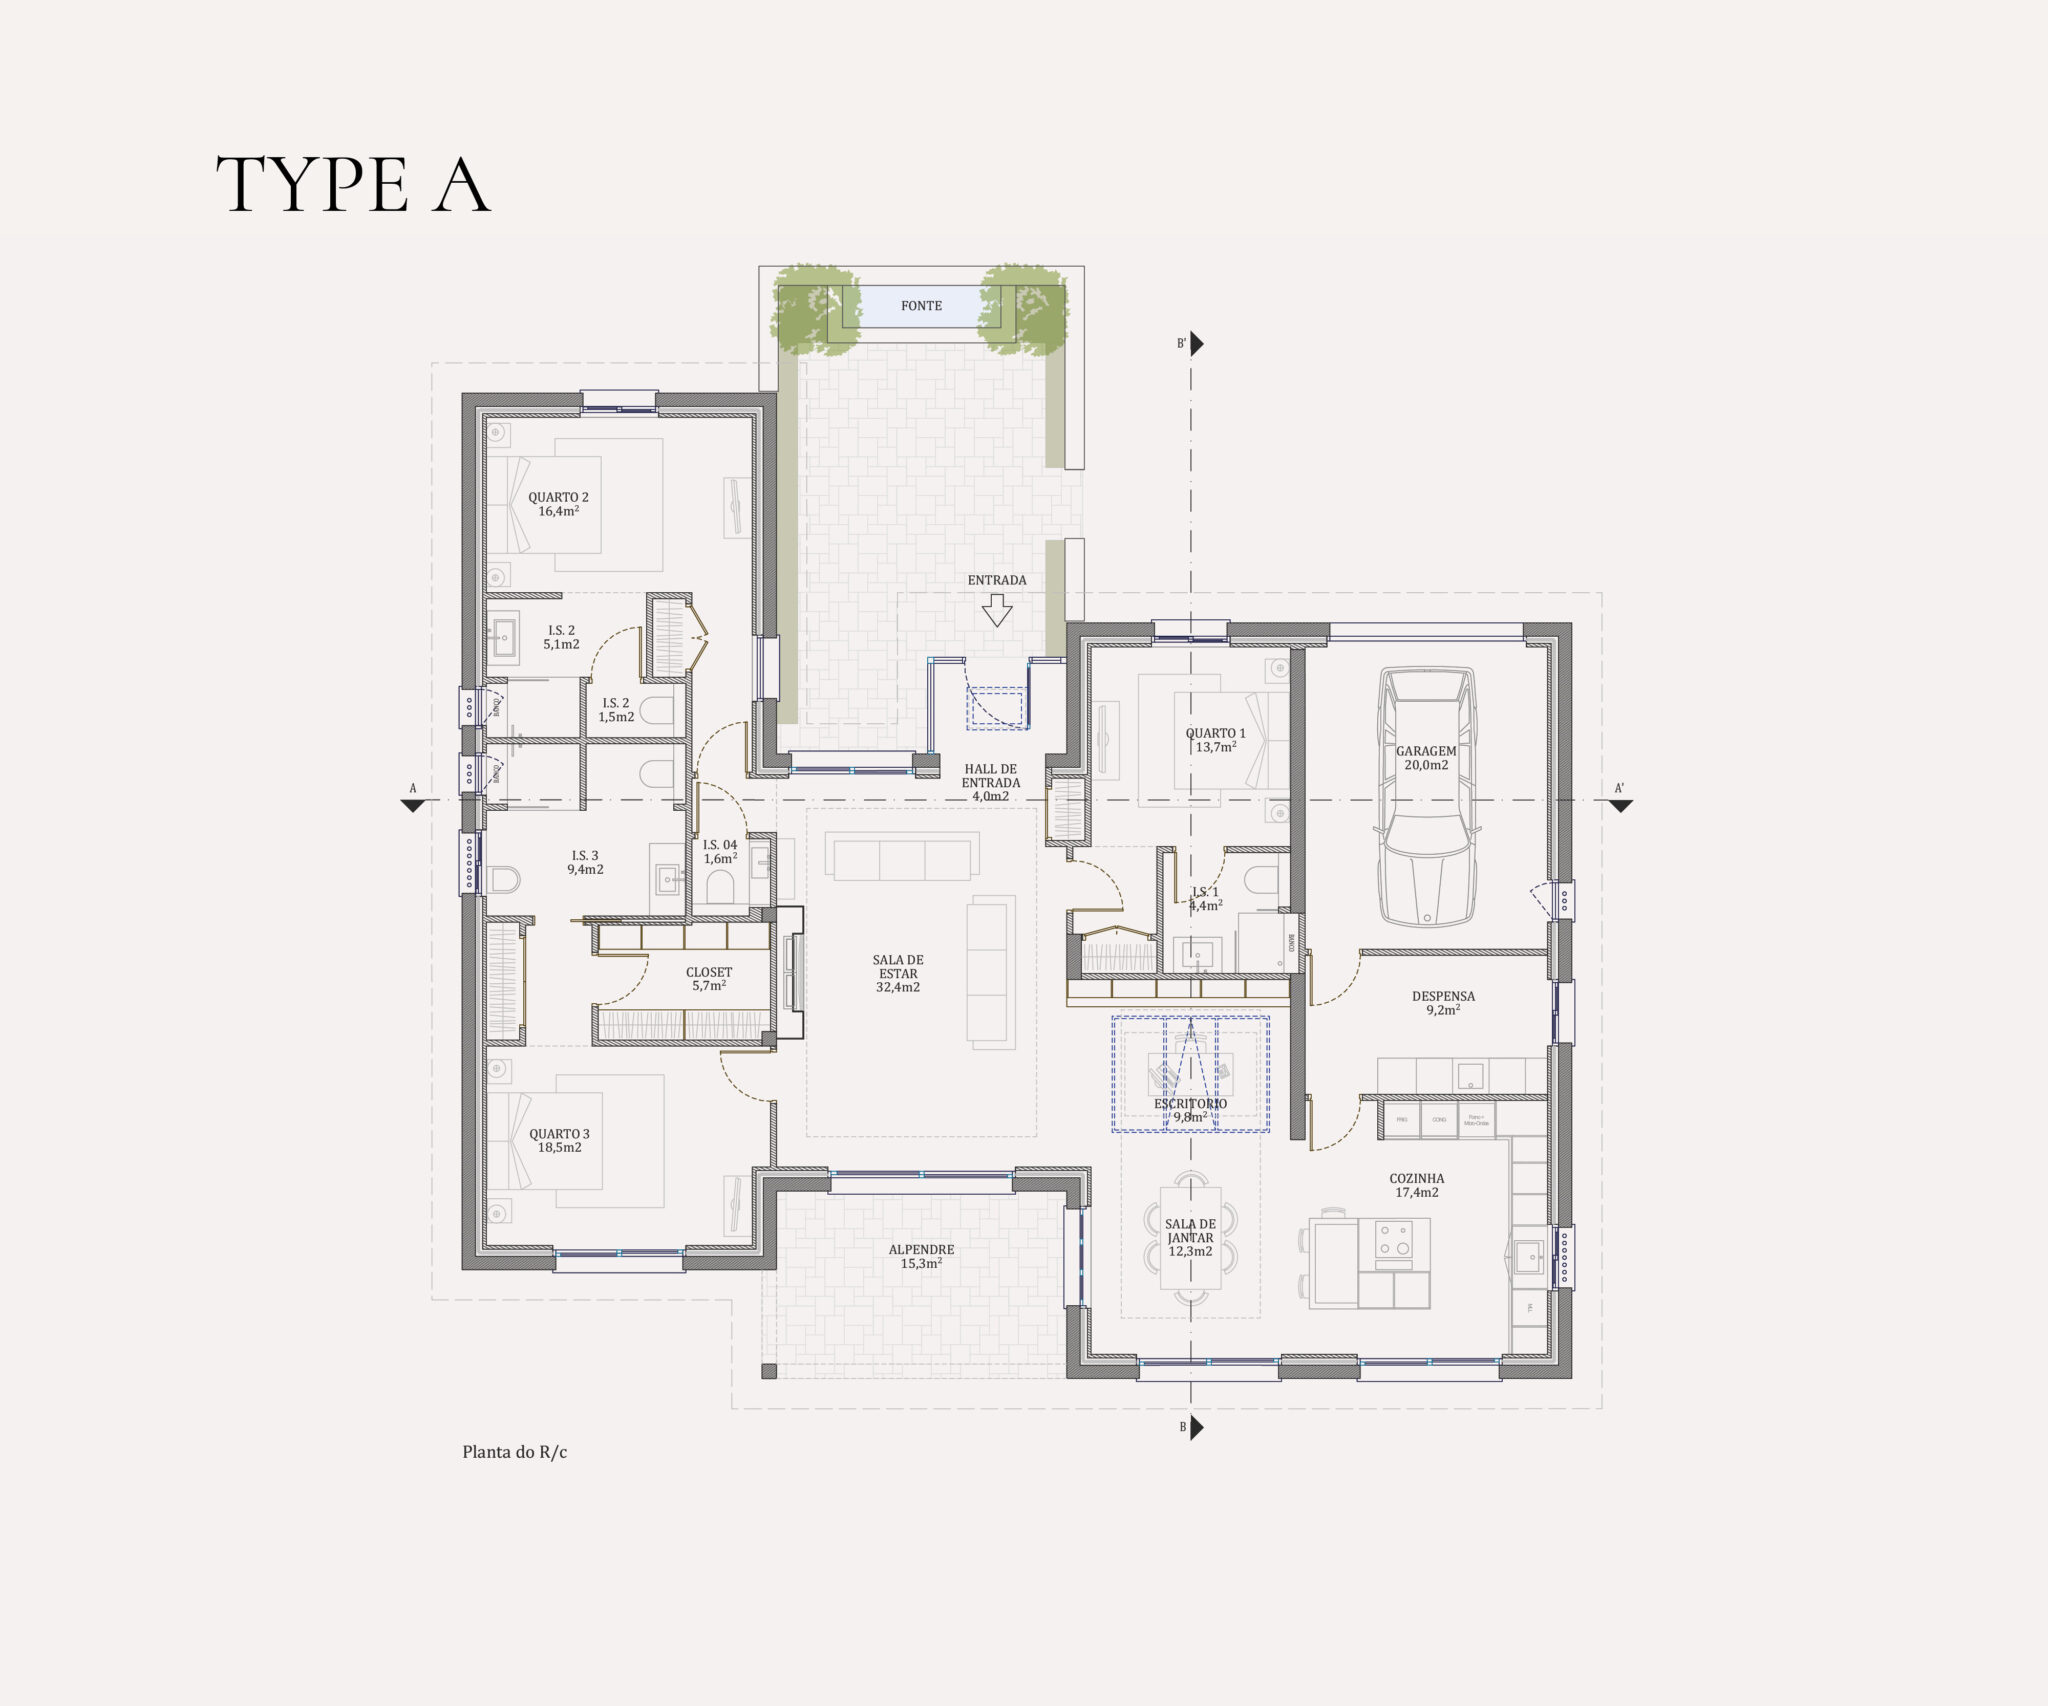 The villas are made up of 4 different types: Type A Villas, Type B Villas, and Type C Villas. This image is an example of the ground floor of Type A Villas